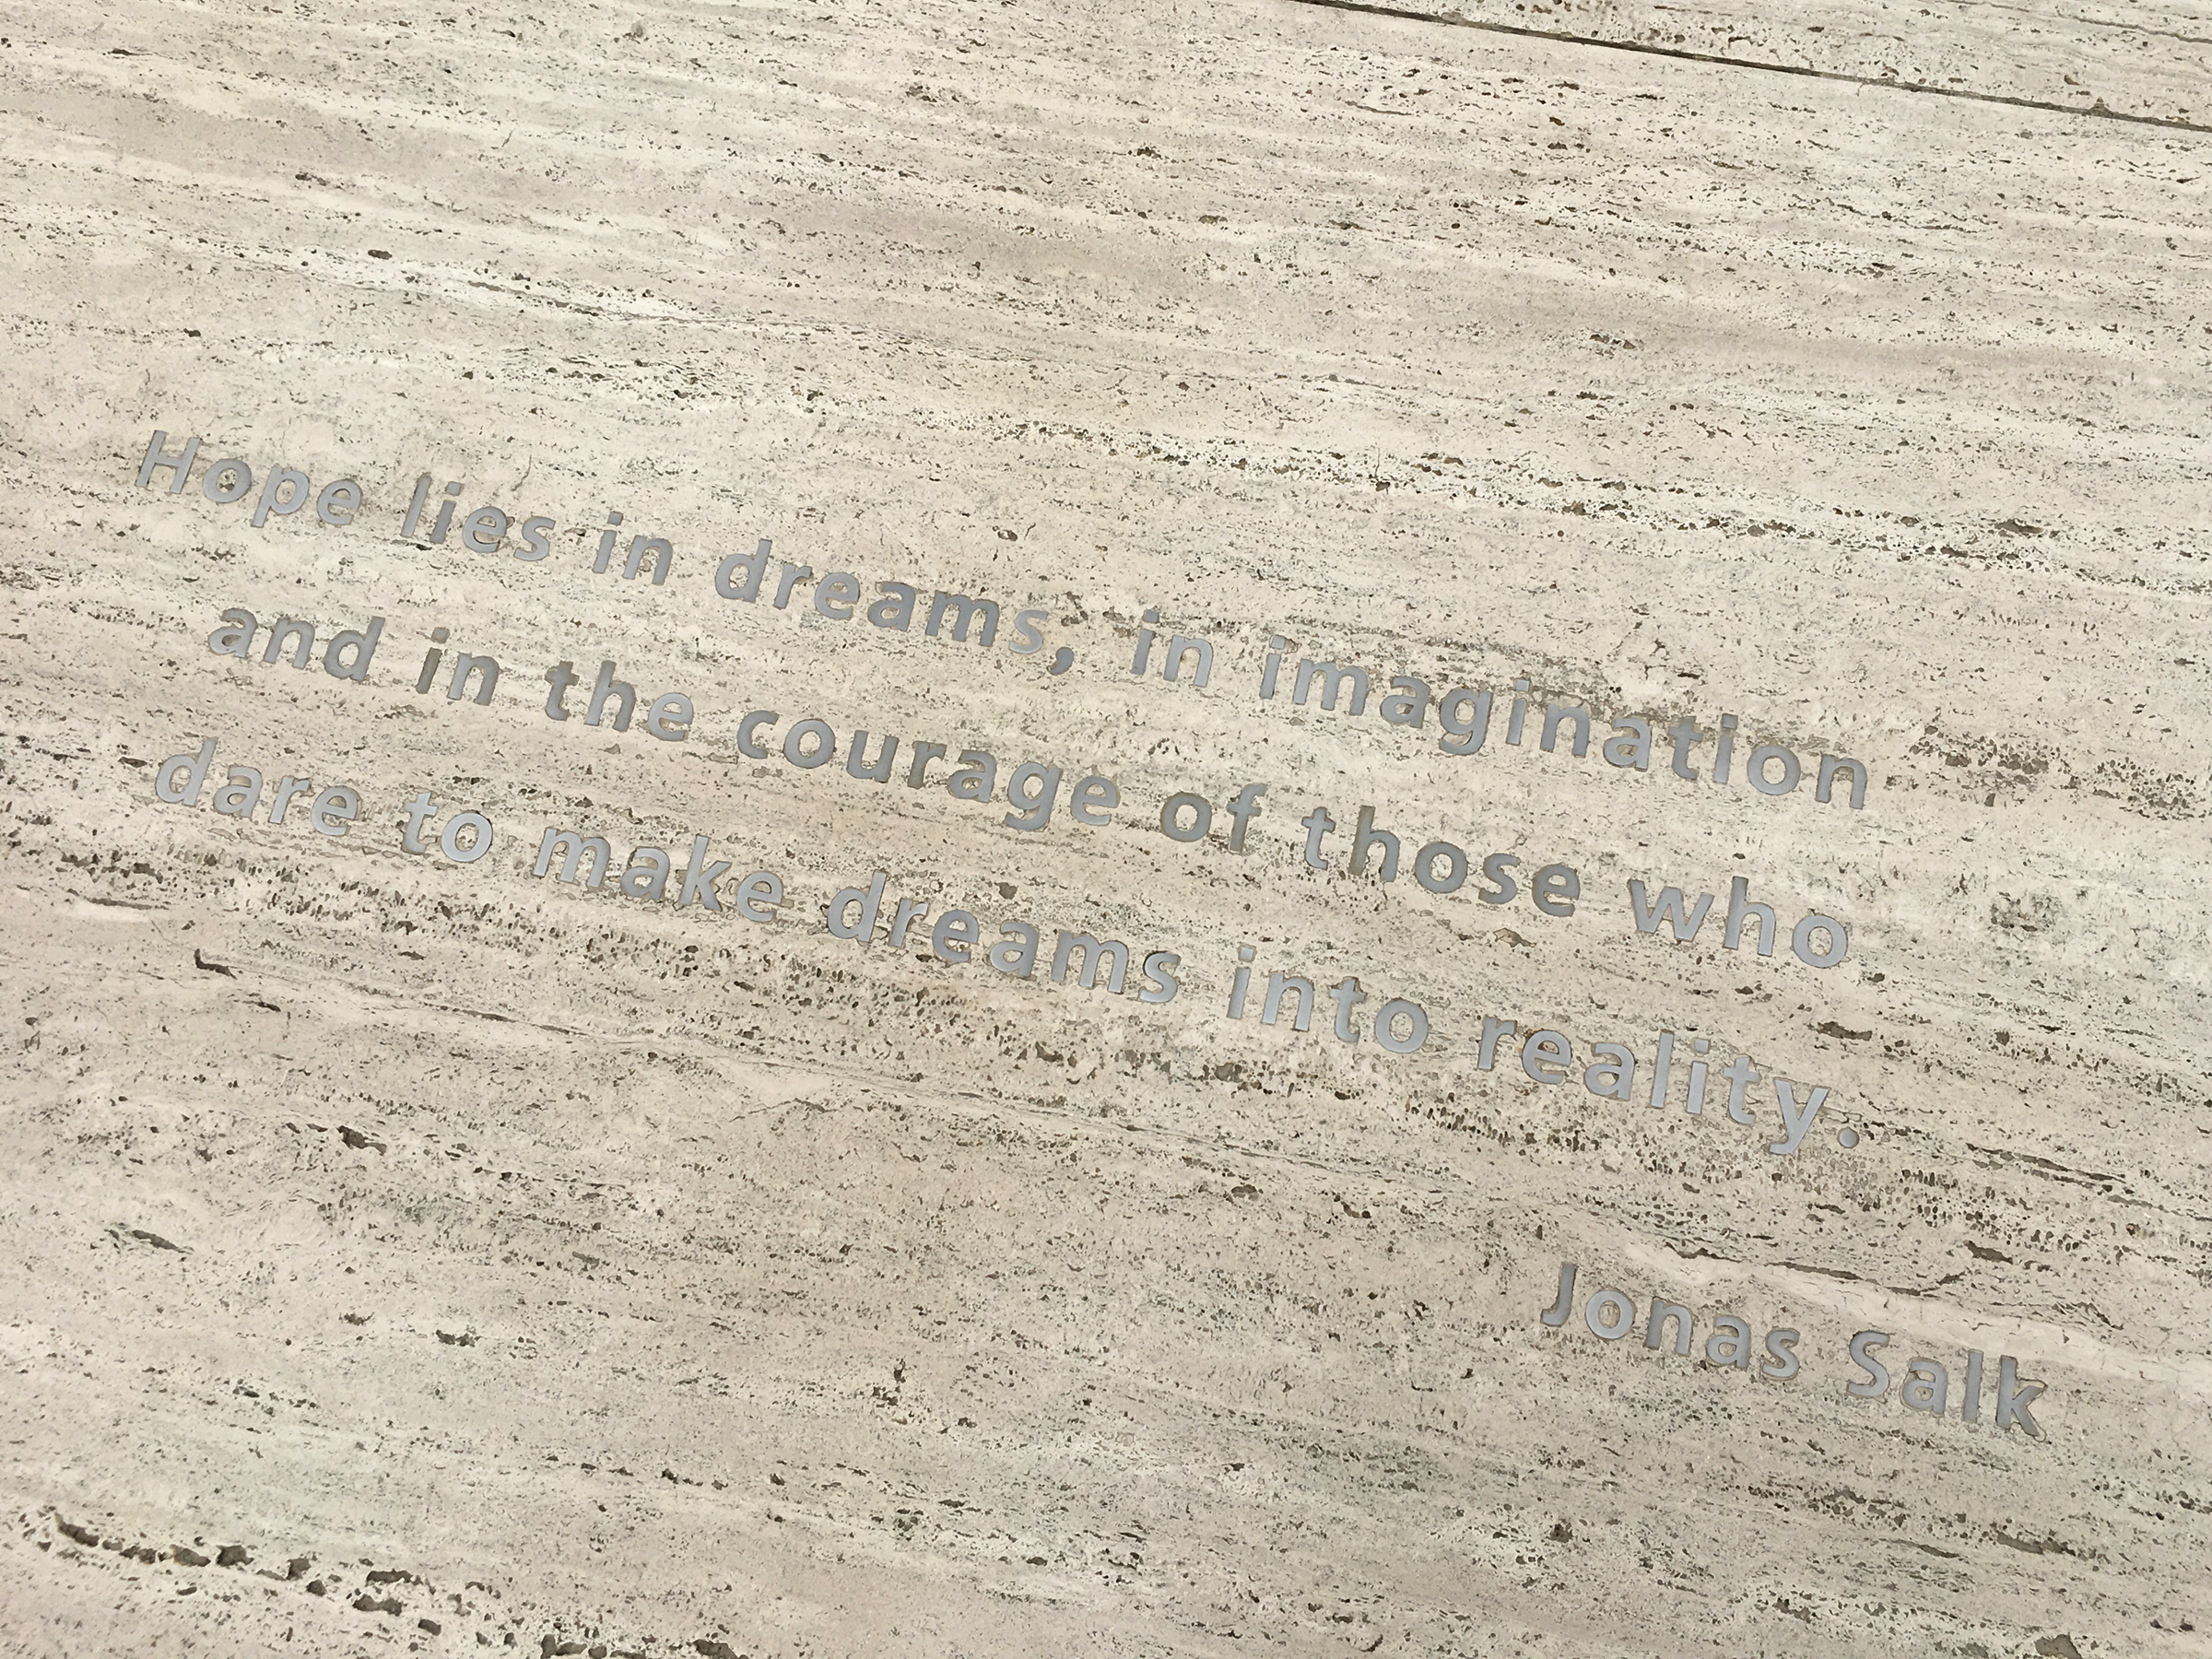 "Hope lies in dreams, in imagination and in the courage of those who dare to make dreams into reality" a famous quote by Jonas Salk at the Salk Institute in La Jolla, California